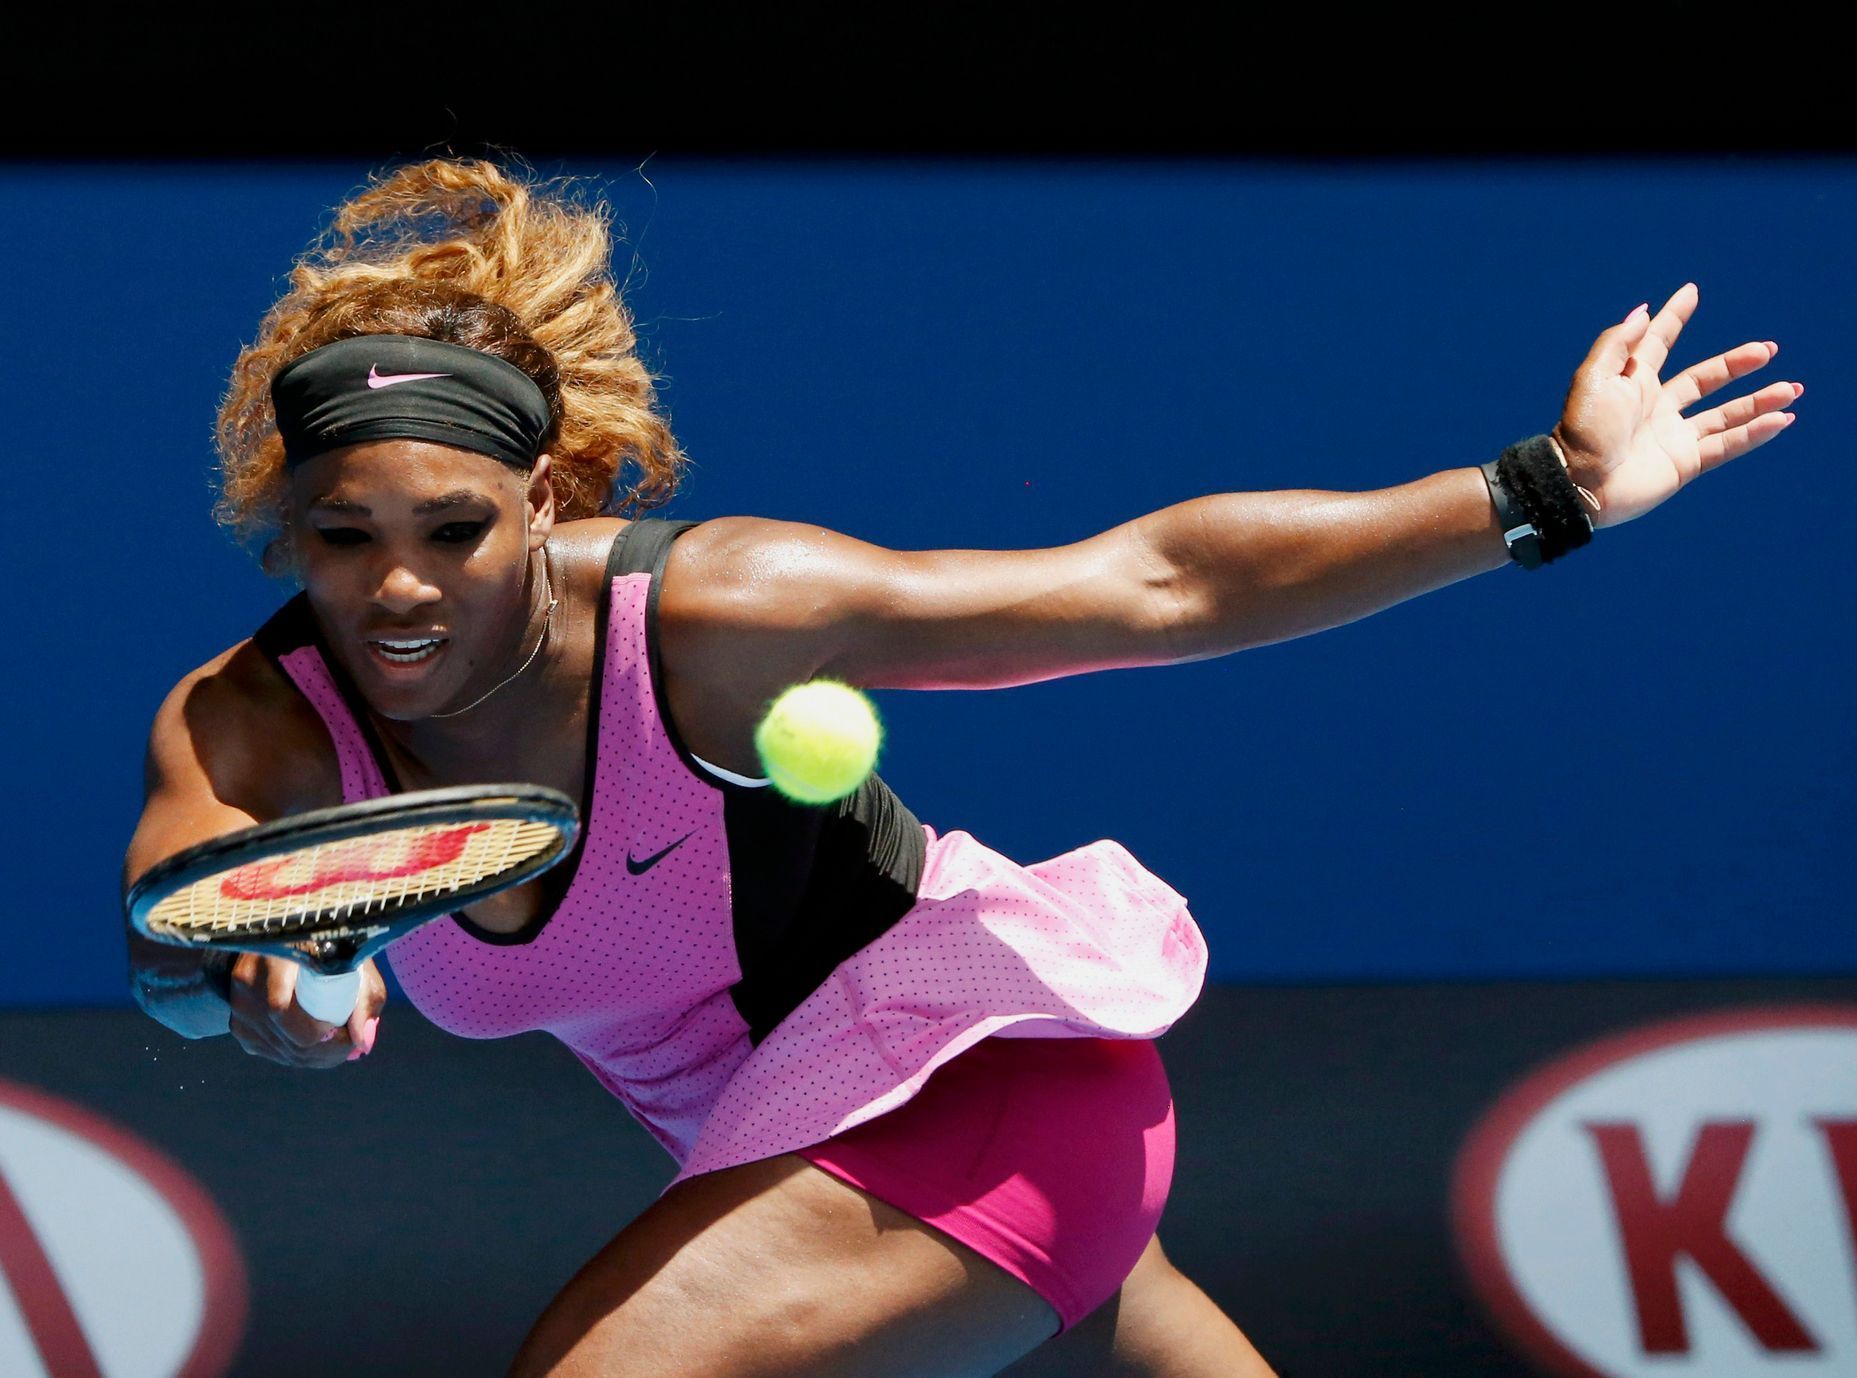 Serena Williams of the U.S. hits a return to Vesna Dolonc of Serbia during their women's singles match at the Australian Open 2014 tennis tournament in Melbourne